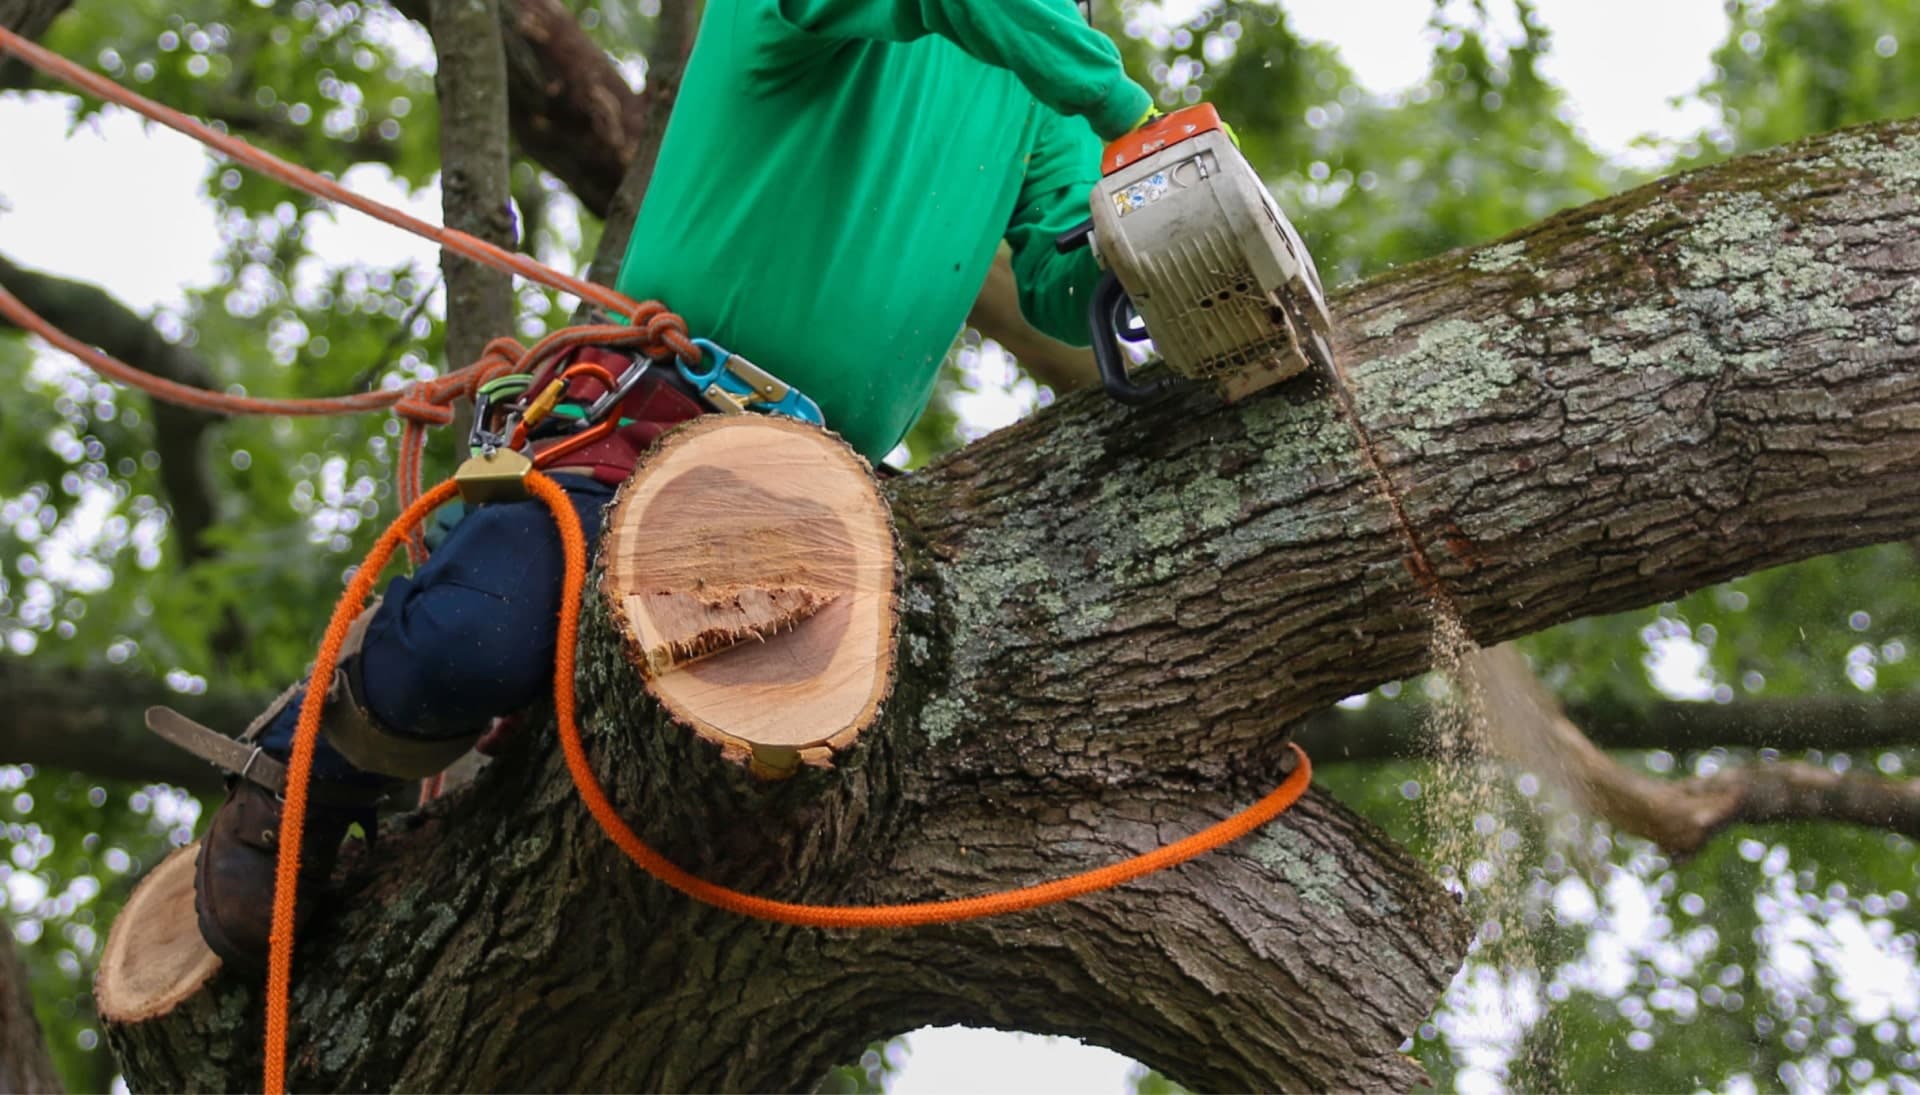 Shed your worries away with best tree removal in Kalispell